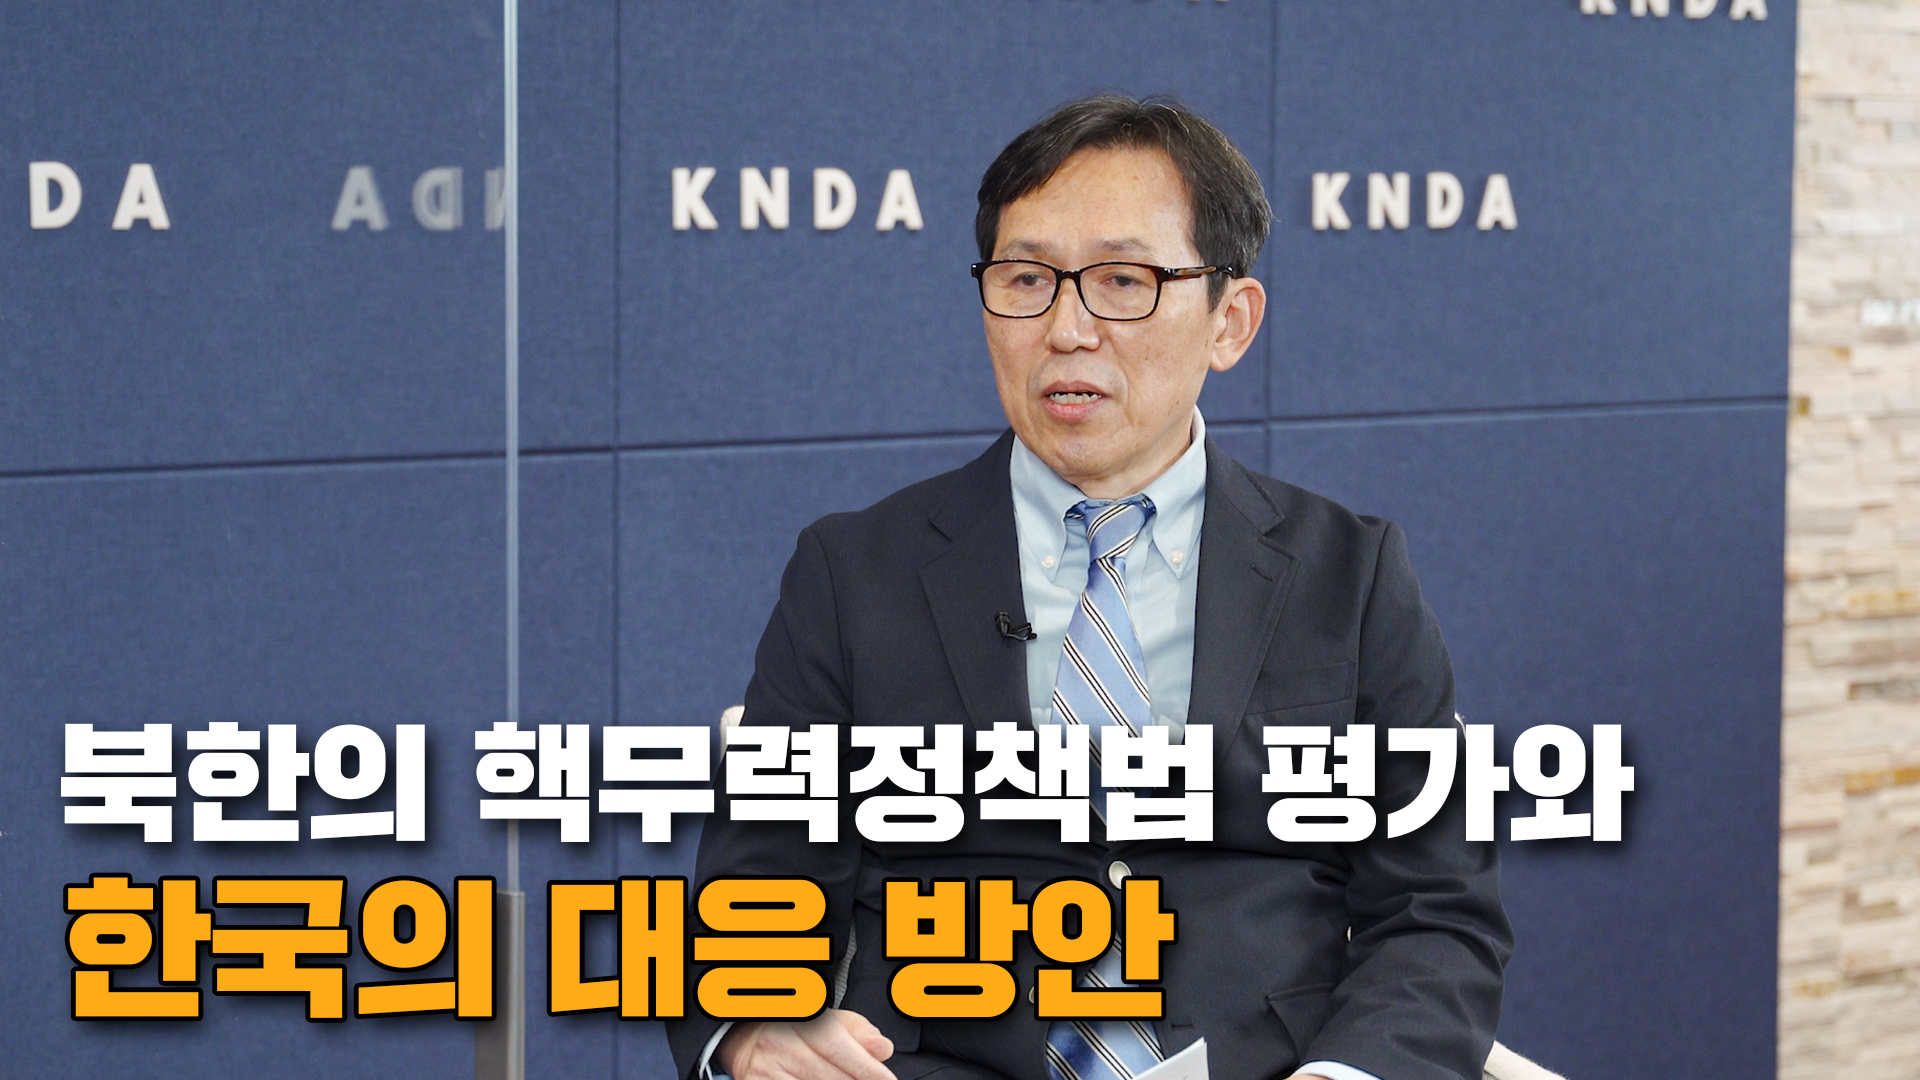 [IFANS Dialogue] An Assessment of DPRK's Law on the Nuclear Forces Policy and ROK's Responses -Professor JUN Bong-geun/Department of National Security and Unification Studies